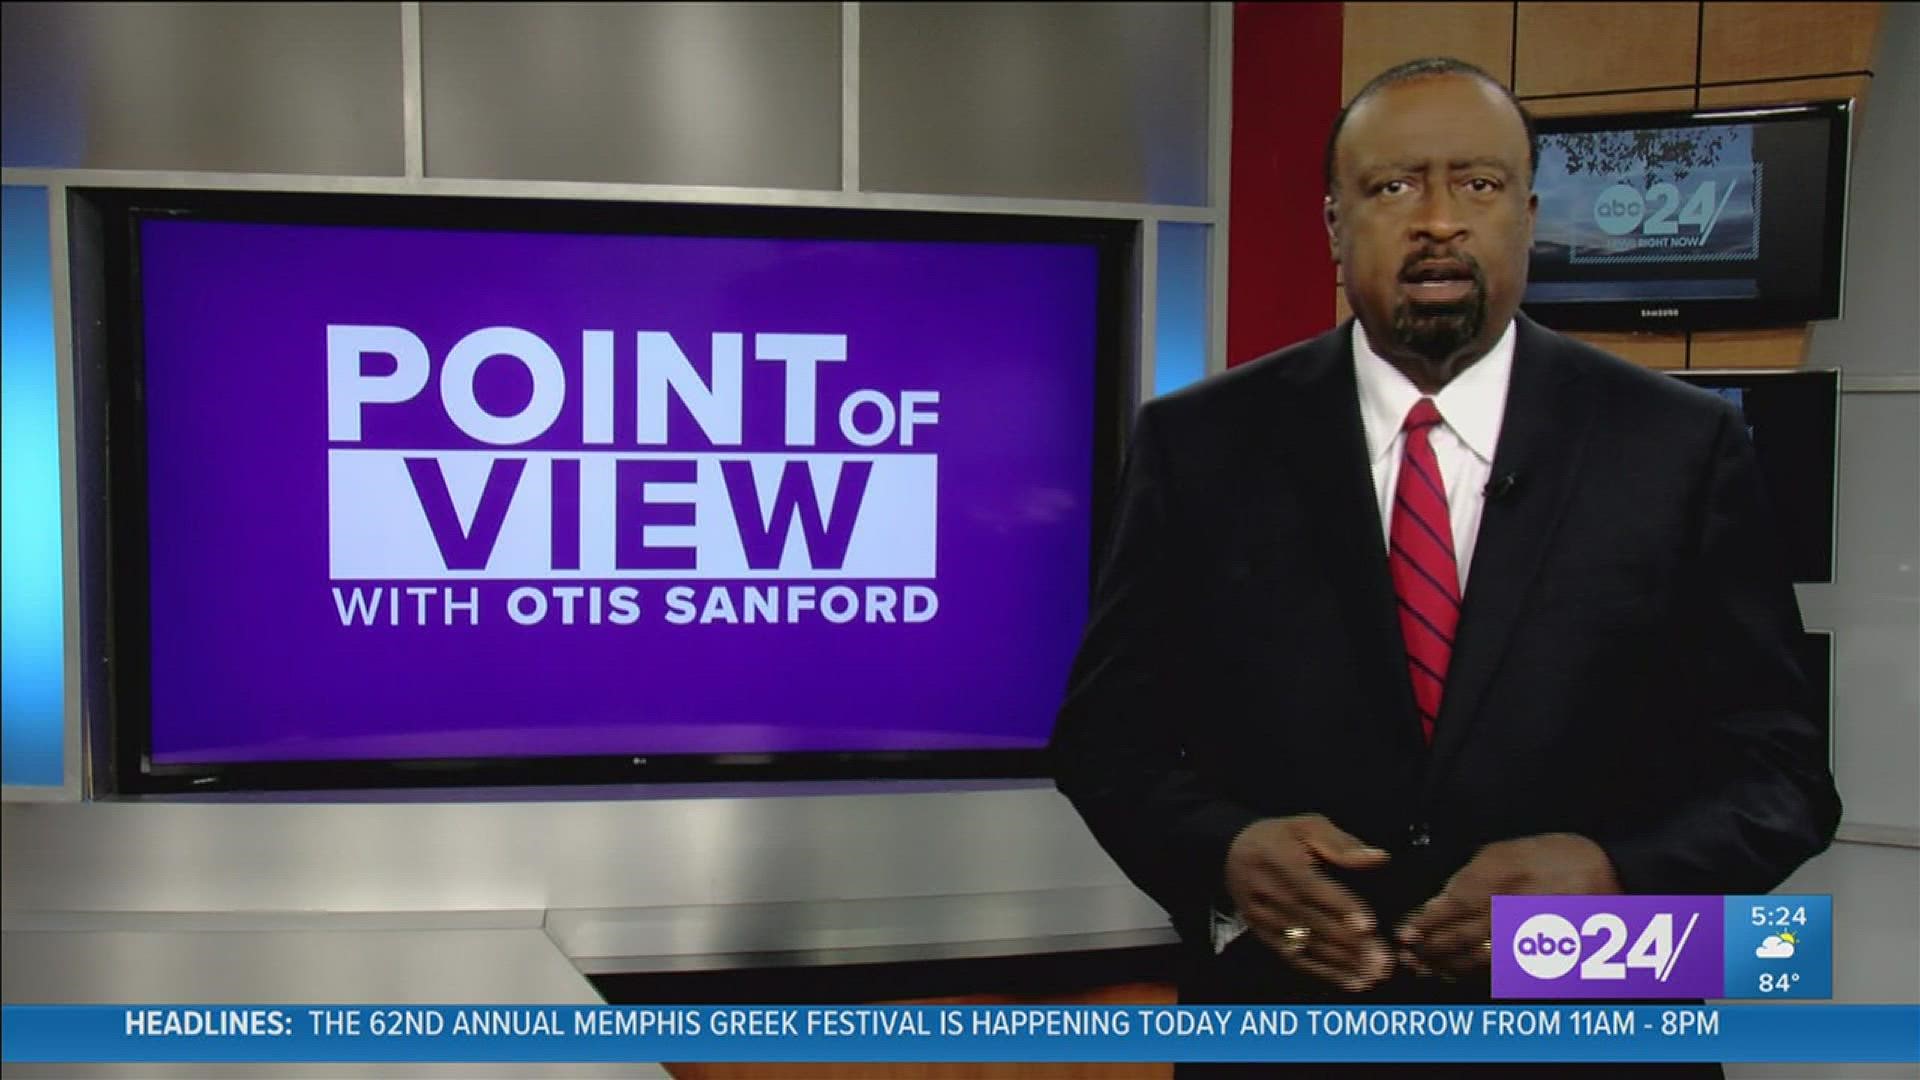 Political analyst and commentator Otis Sanford shared his point of view on the latest information on the Collierville Kroger mass shooting.